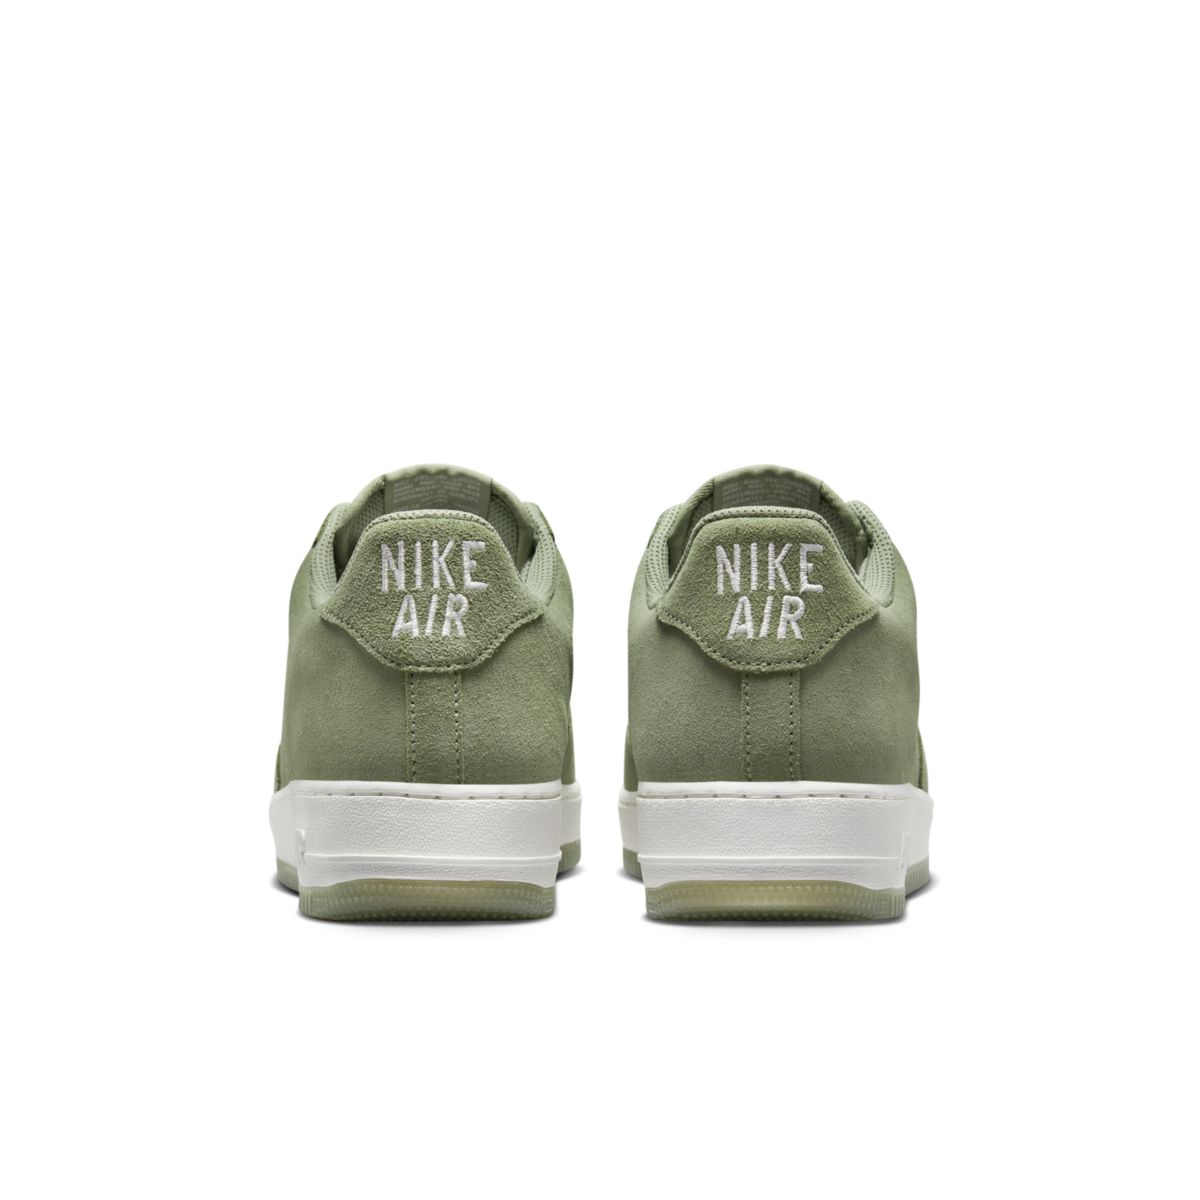 Nike Air Force 1 Low Suede Oil Green Color of the Month DV0785-300 F